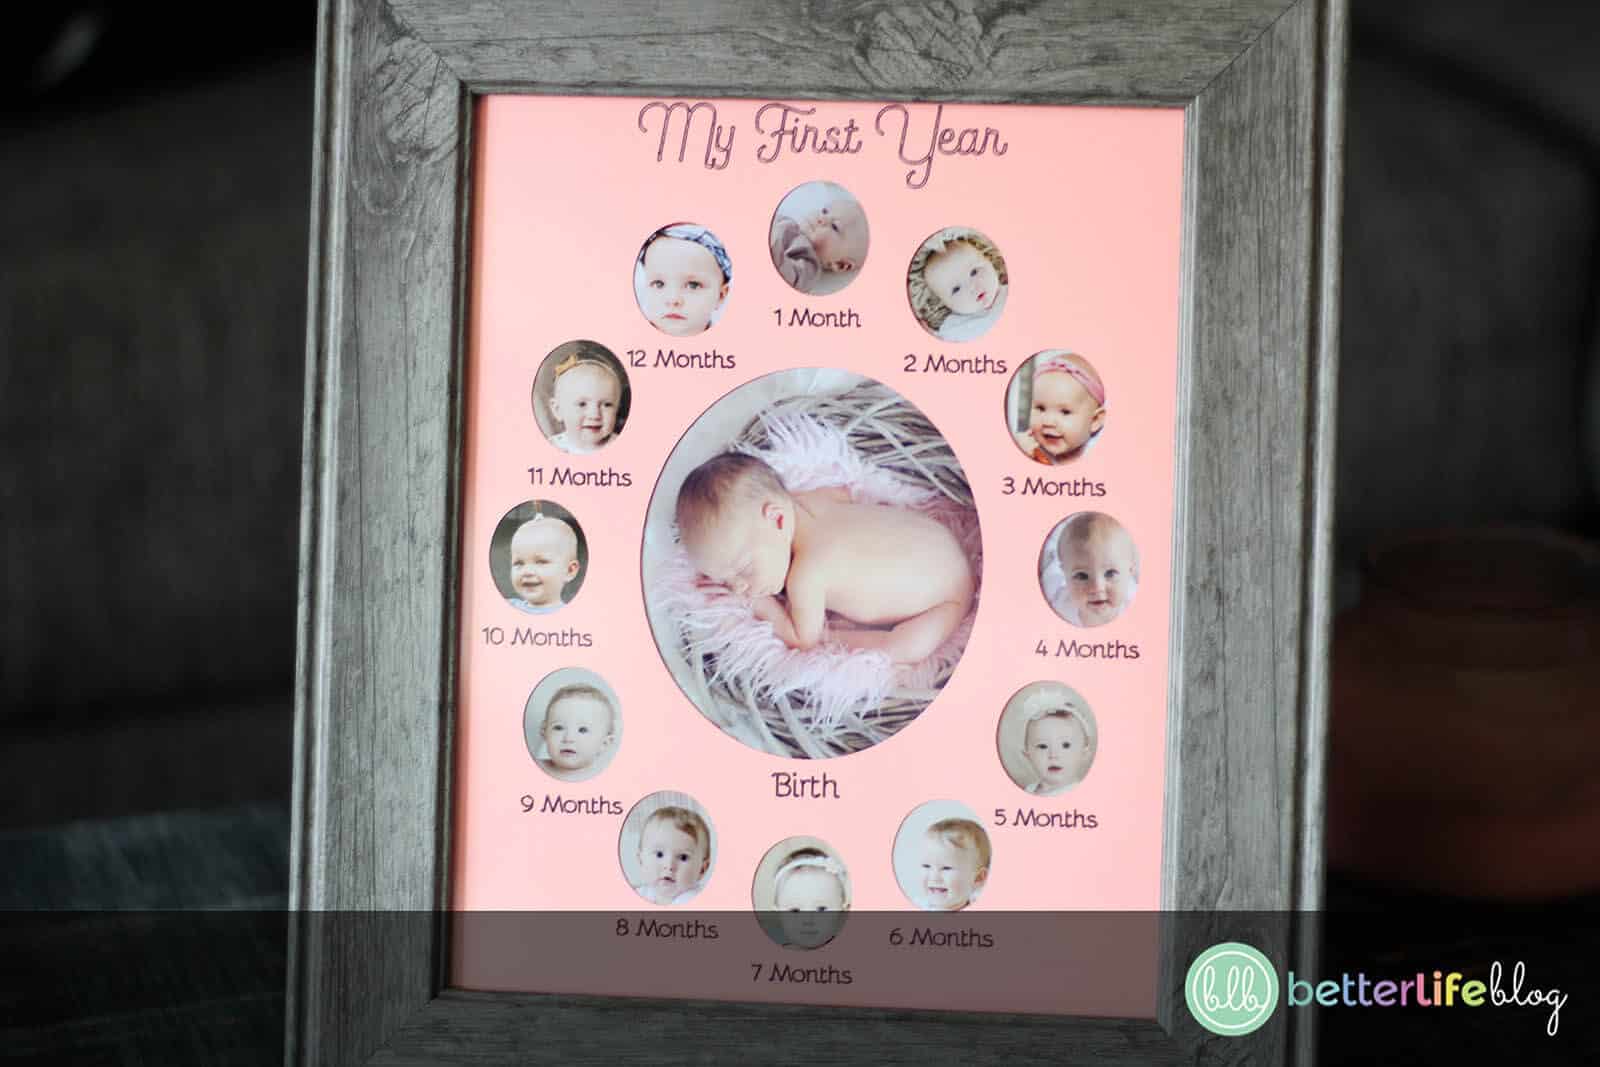 Oh, baby! This Baby Milestone Frame is a gorgeous keepsake that’s handmade with love! Plus, it allows you to enjoy your little ones' cutest snapshots at a glance. Learn how to make one with our easy-to-follow tutorial.